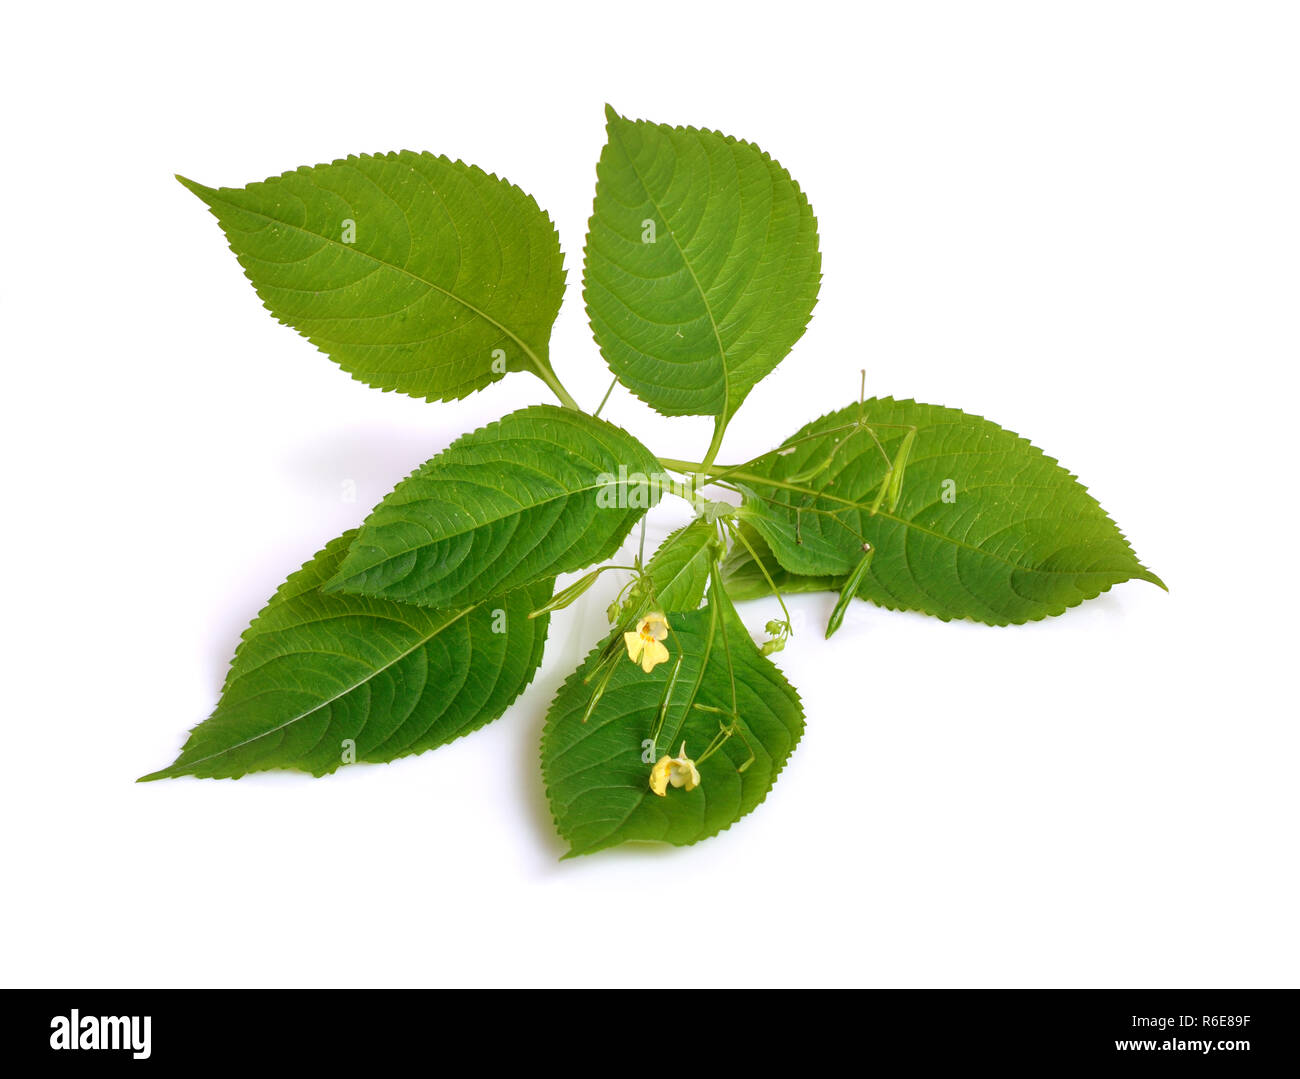 Impatiens. Common names include impatiens, jewelweed, touch-me-not, snapweed, patience. Isolated. Stock Photo